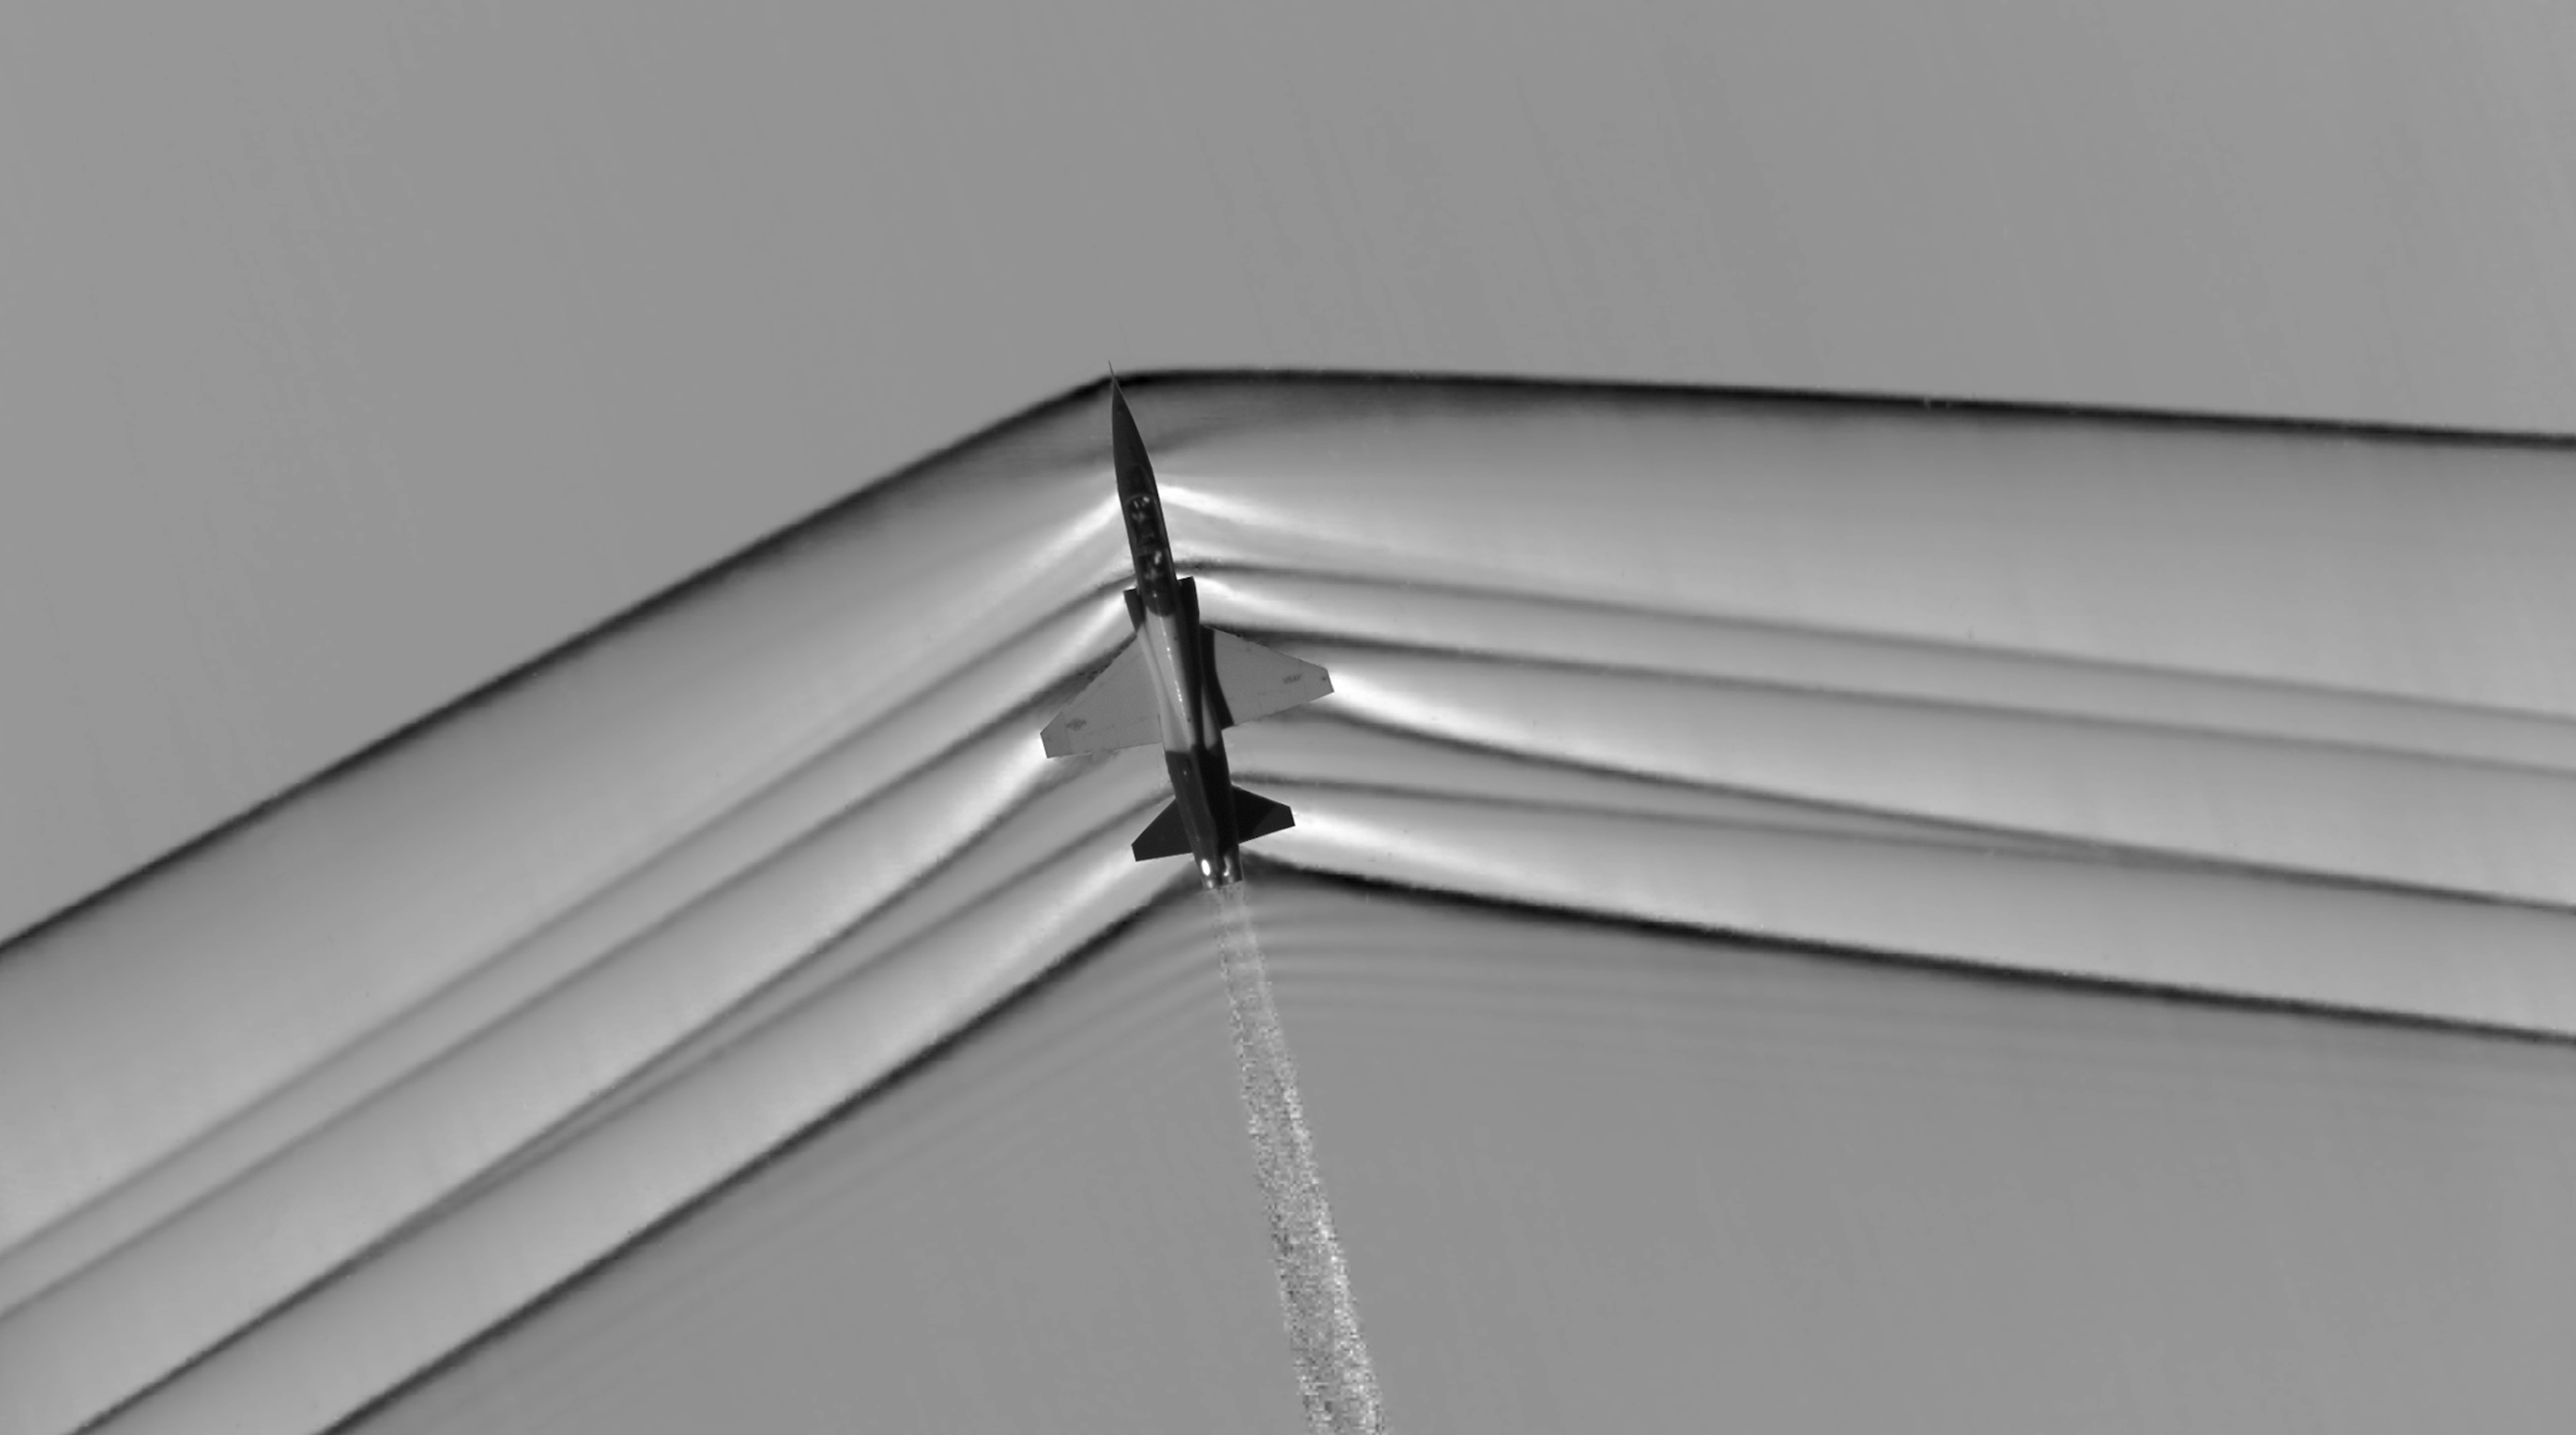 Beautiful images could lead to quieter supersonic jets